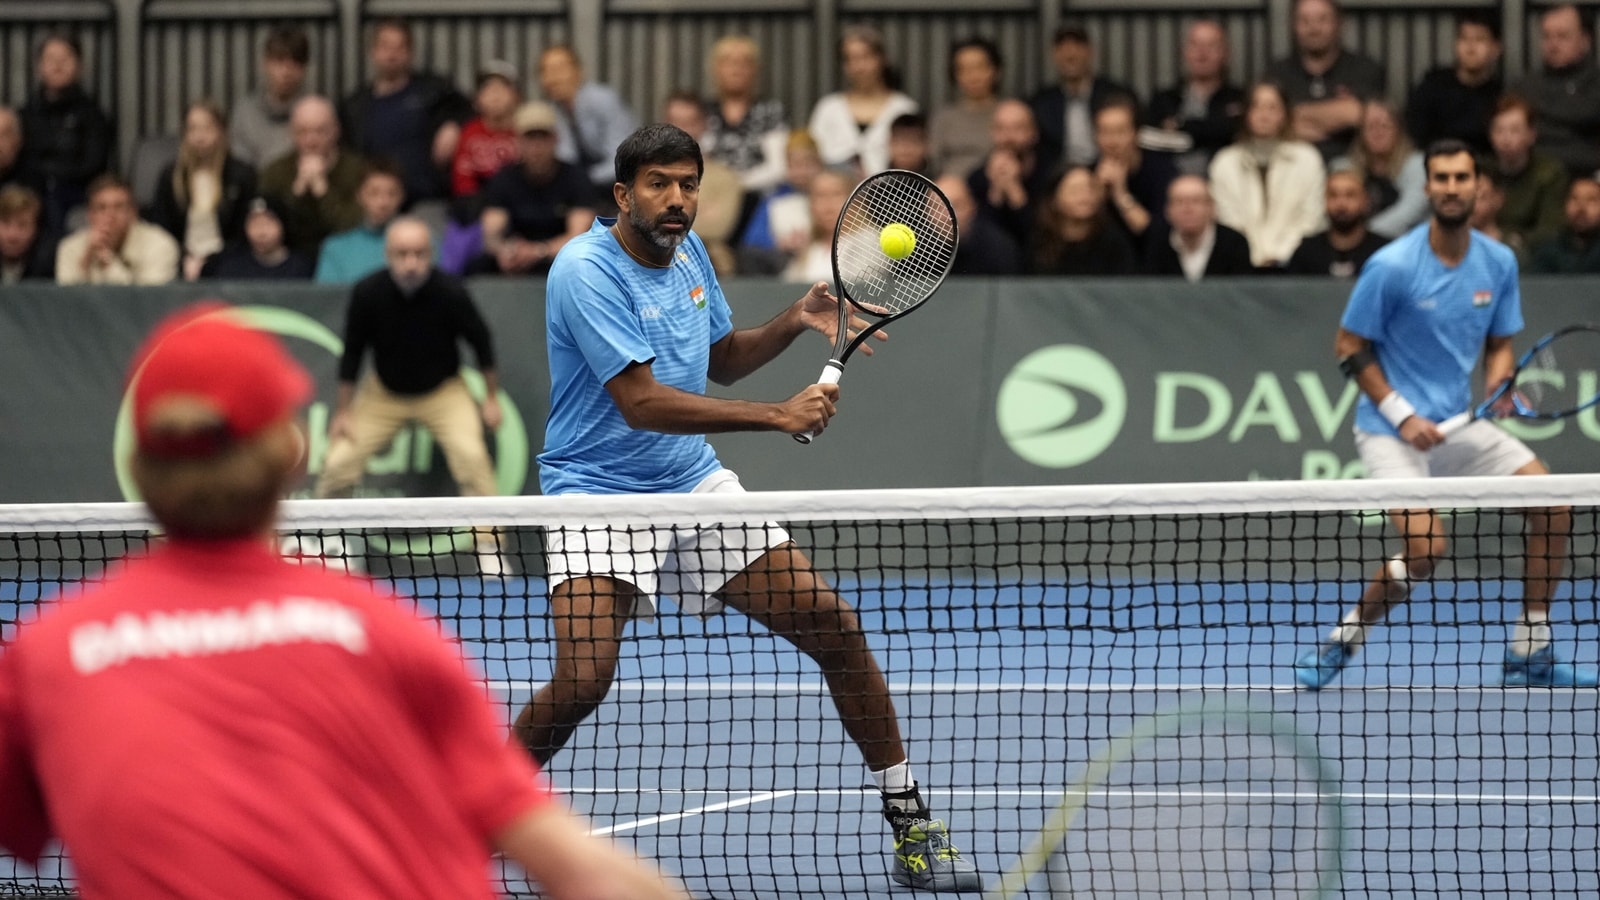 Davis Cup: India relegated to World Group II after losing Playoff 2-3 to Denmark